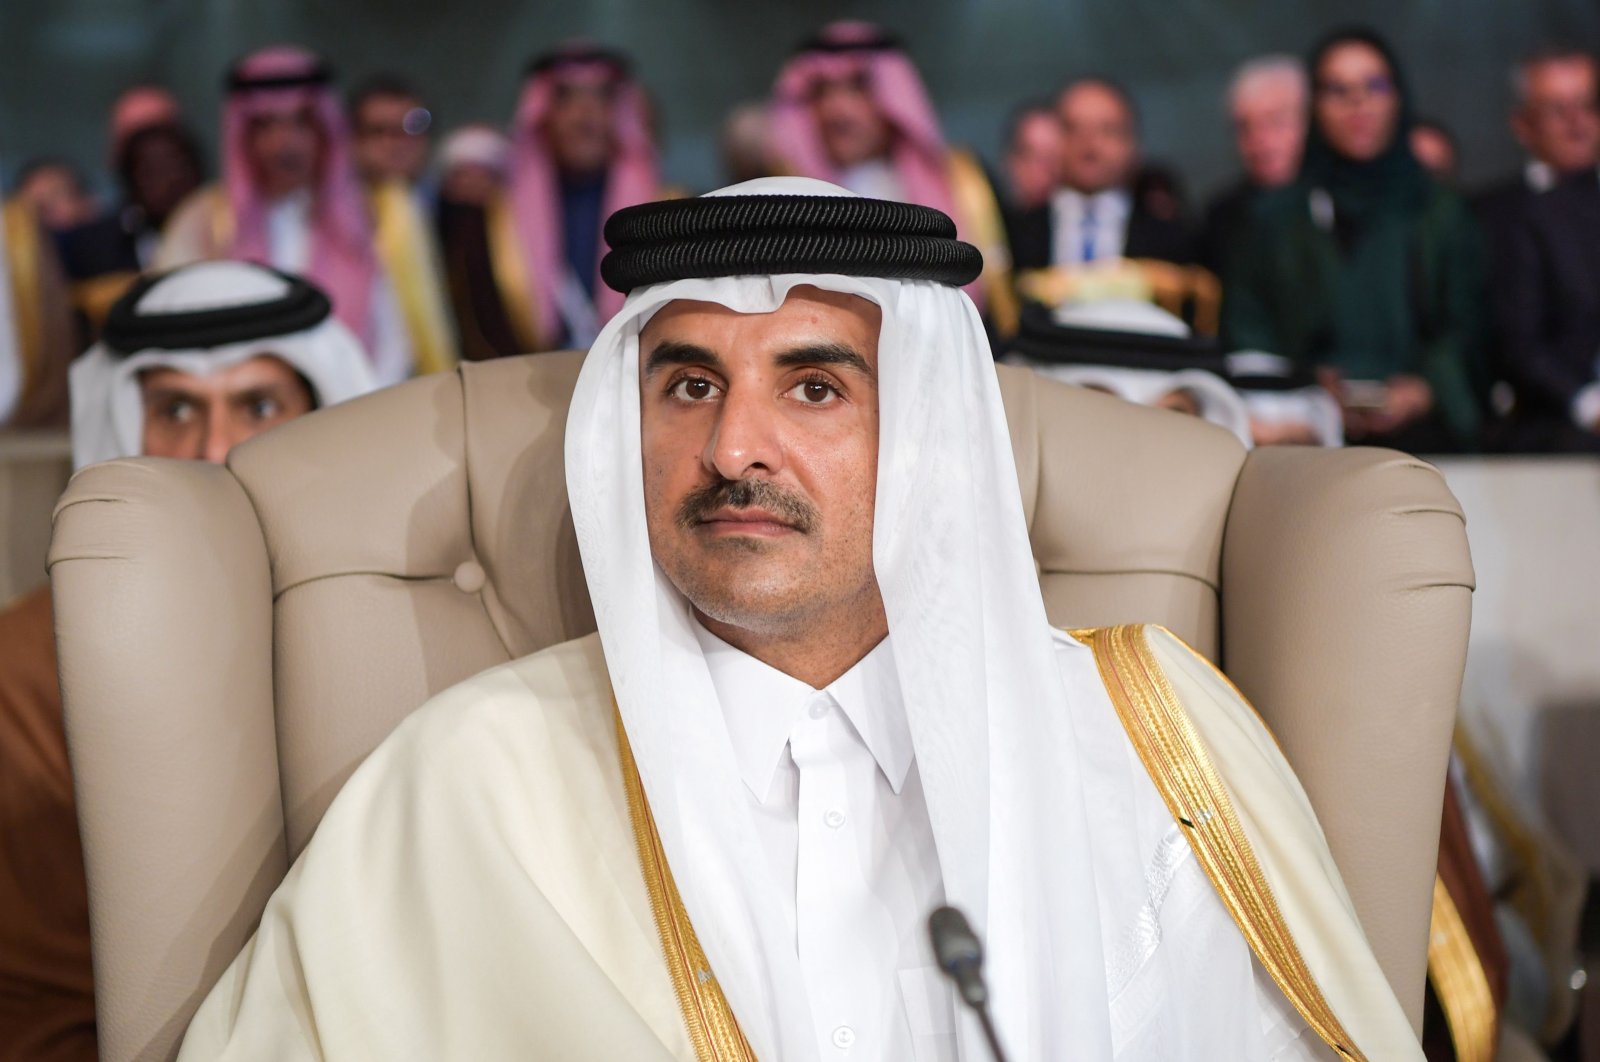 Qatar's Emir Sheikh Tamim bin Hamad Al Thani attends the opening session of the 30th Arab League summit in the Tunisian capital Tunis, March 31, 2019. (AFP Photo)